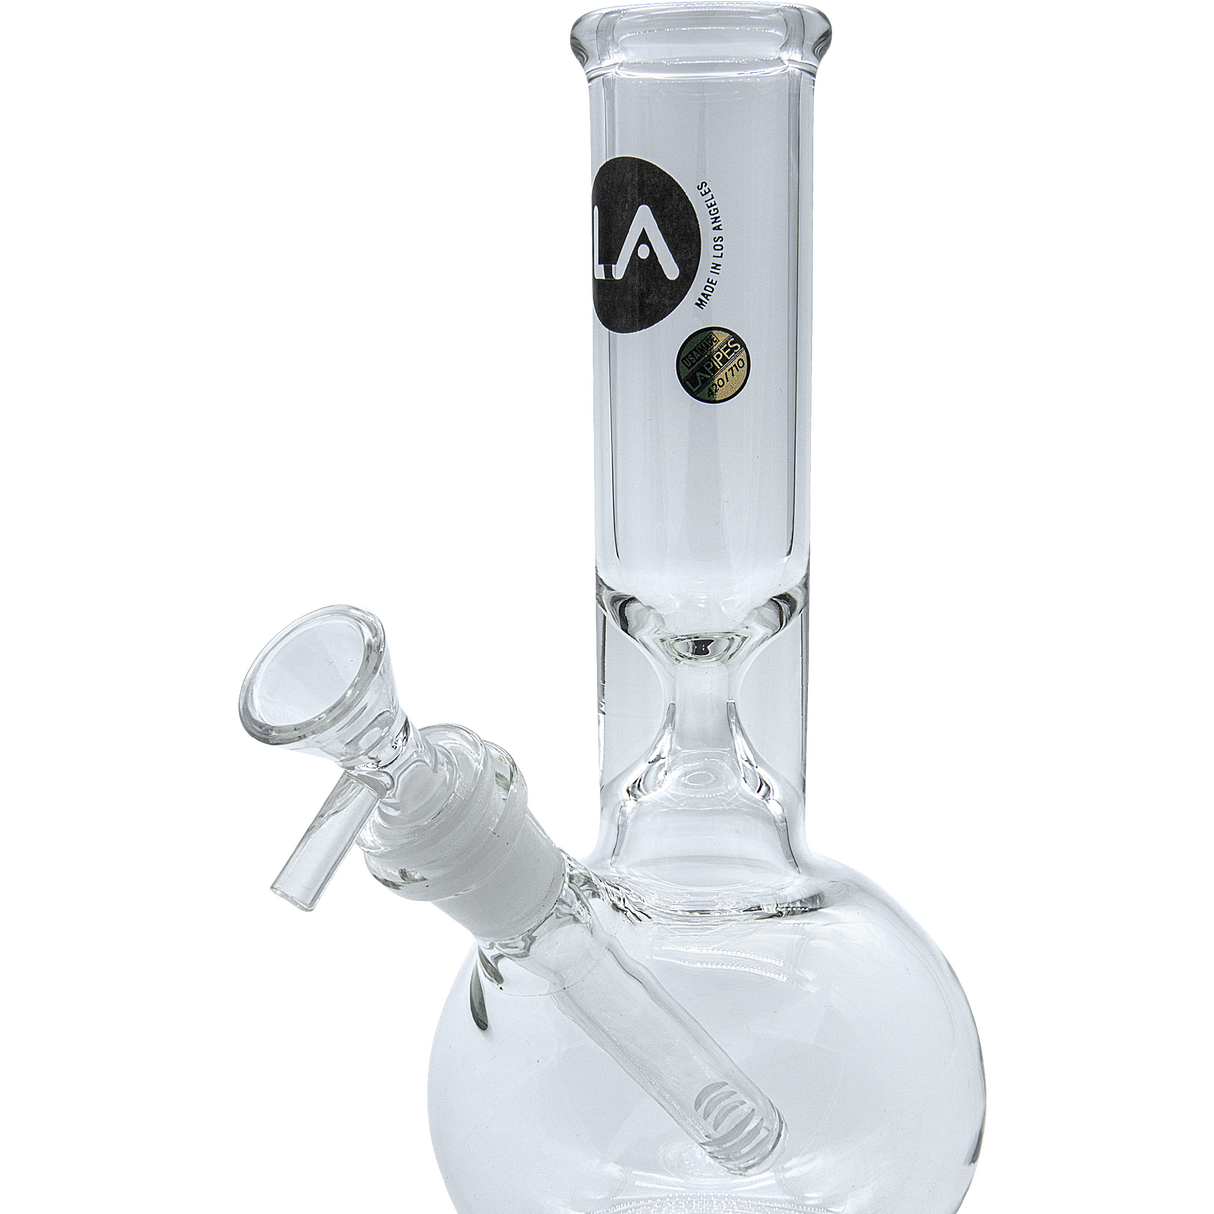 LA Pipes Baller Bubble Base Bong with 45 Degree Joint and Borosilicate Glass, Front View